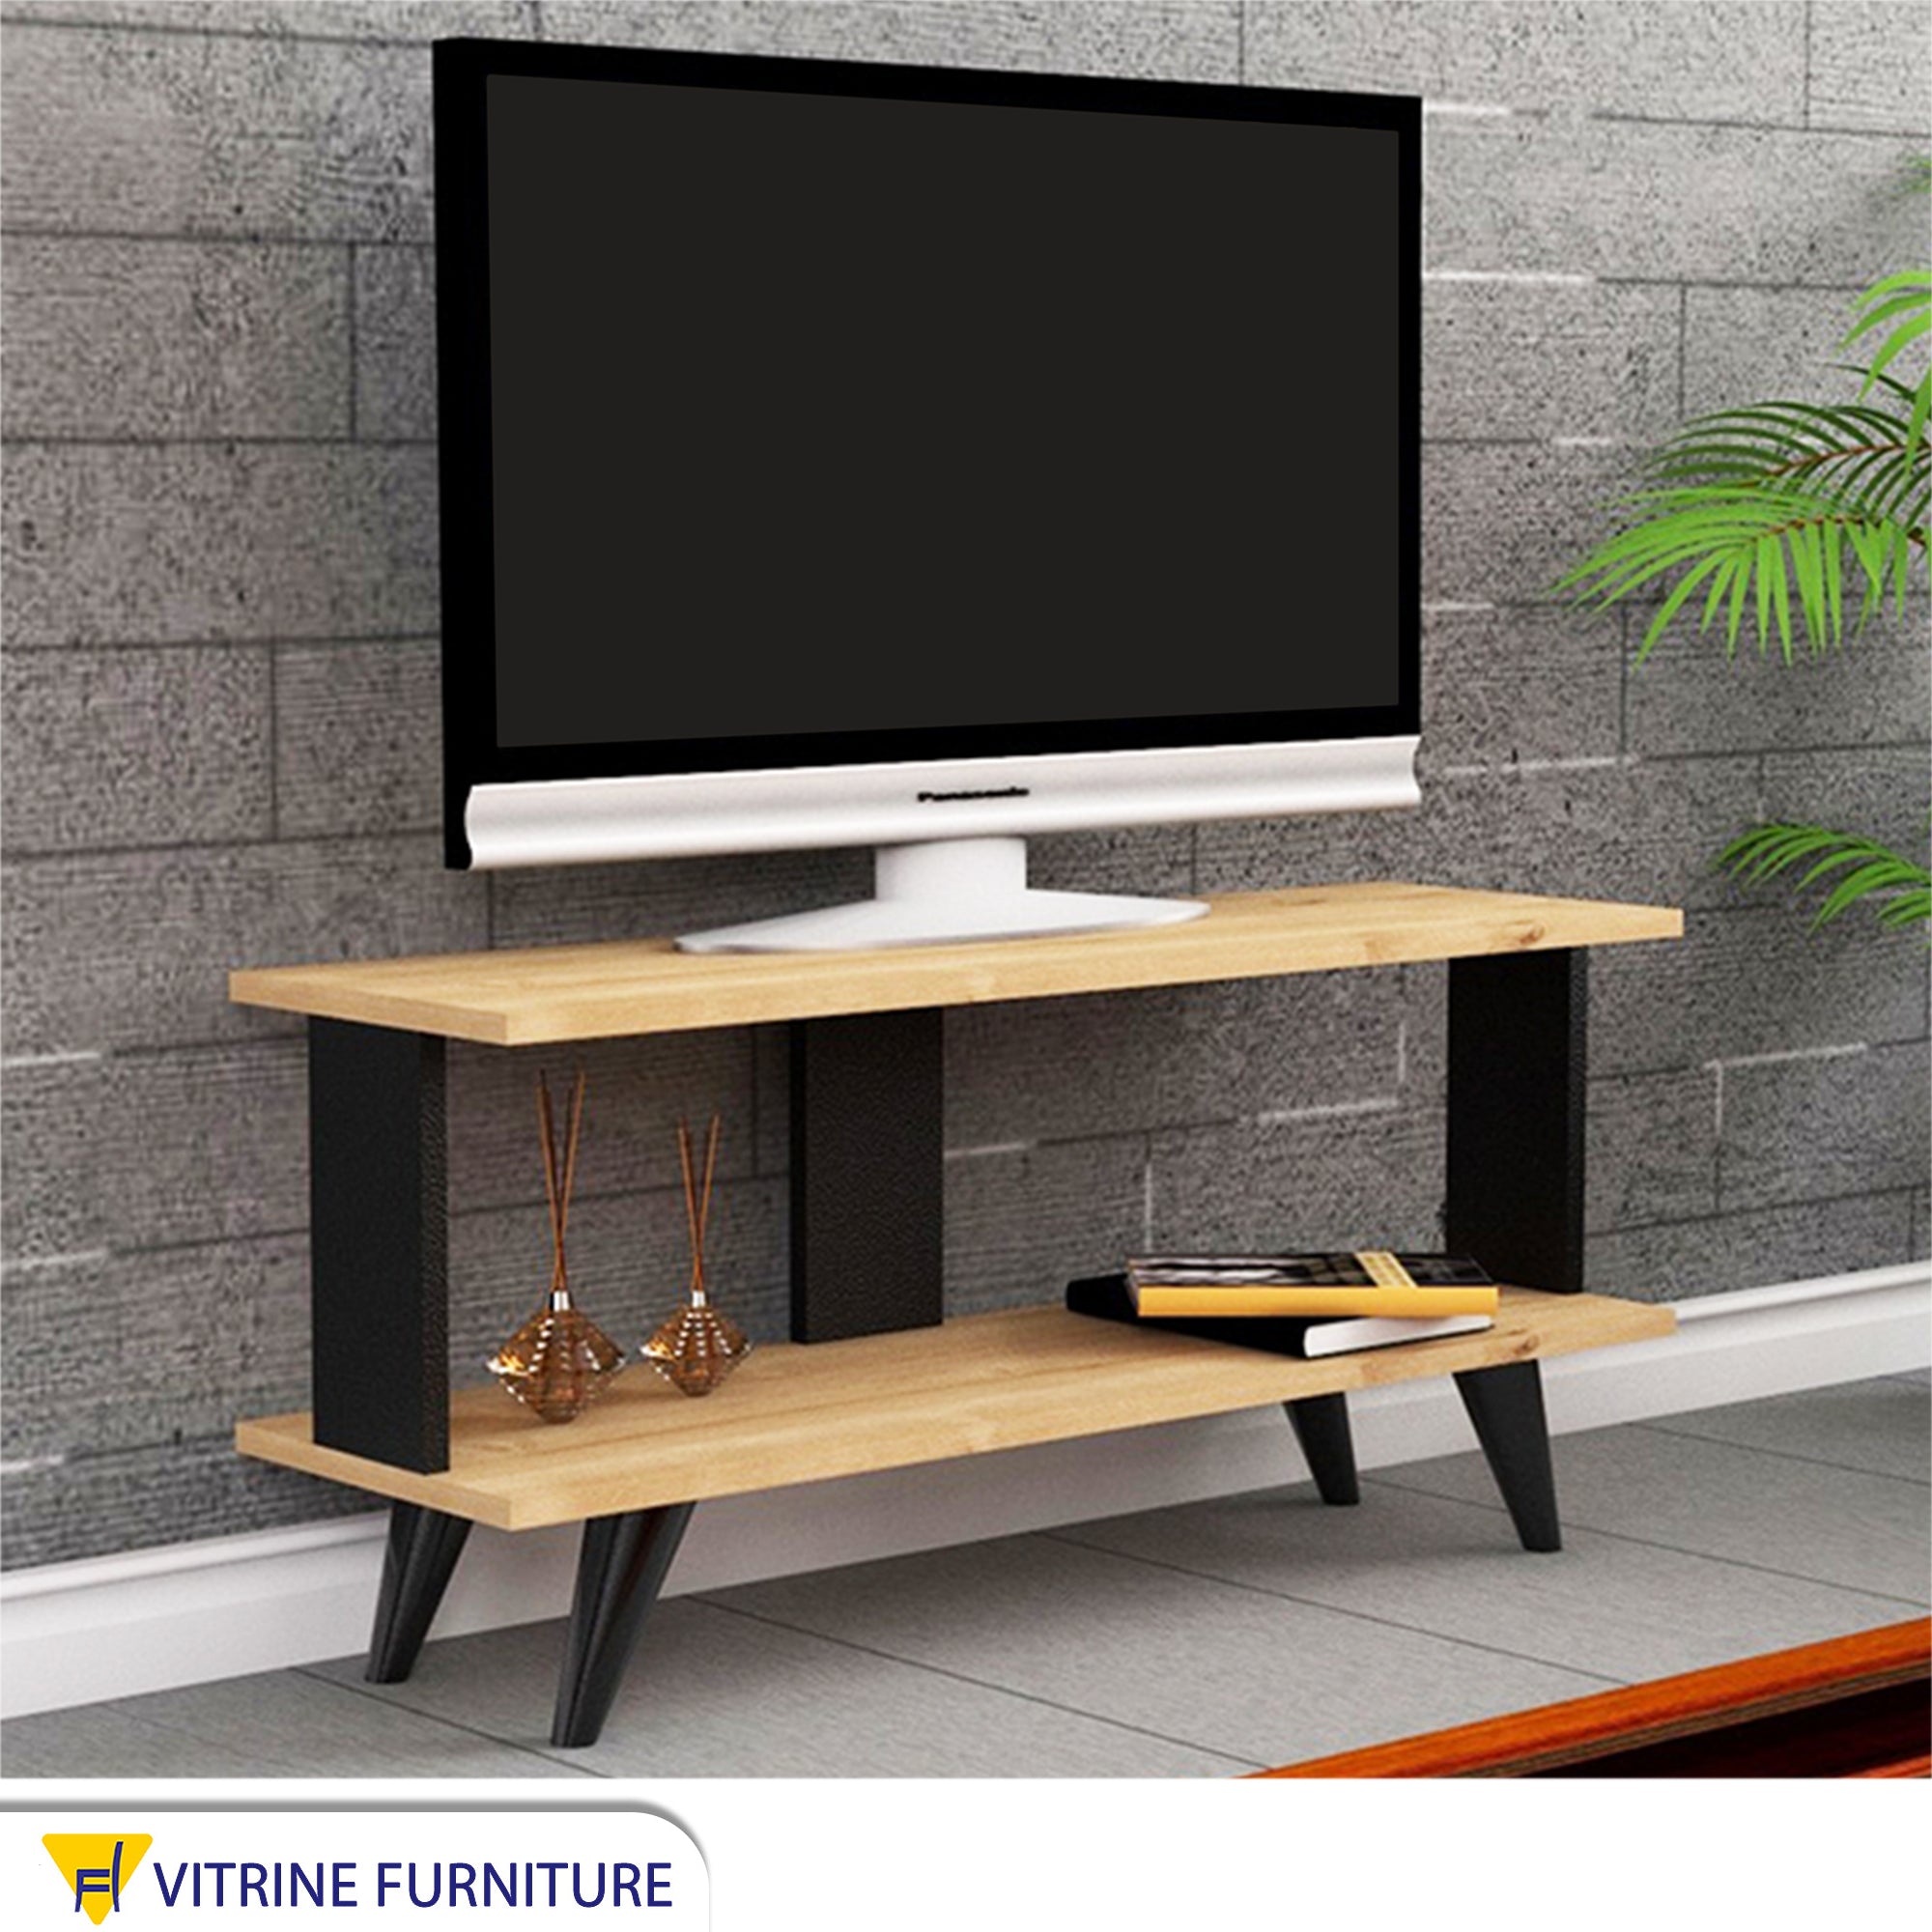 Black and beige TV table